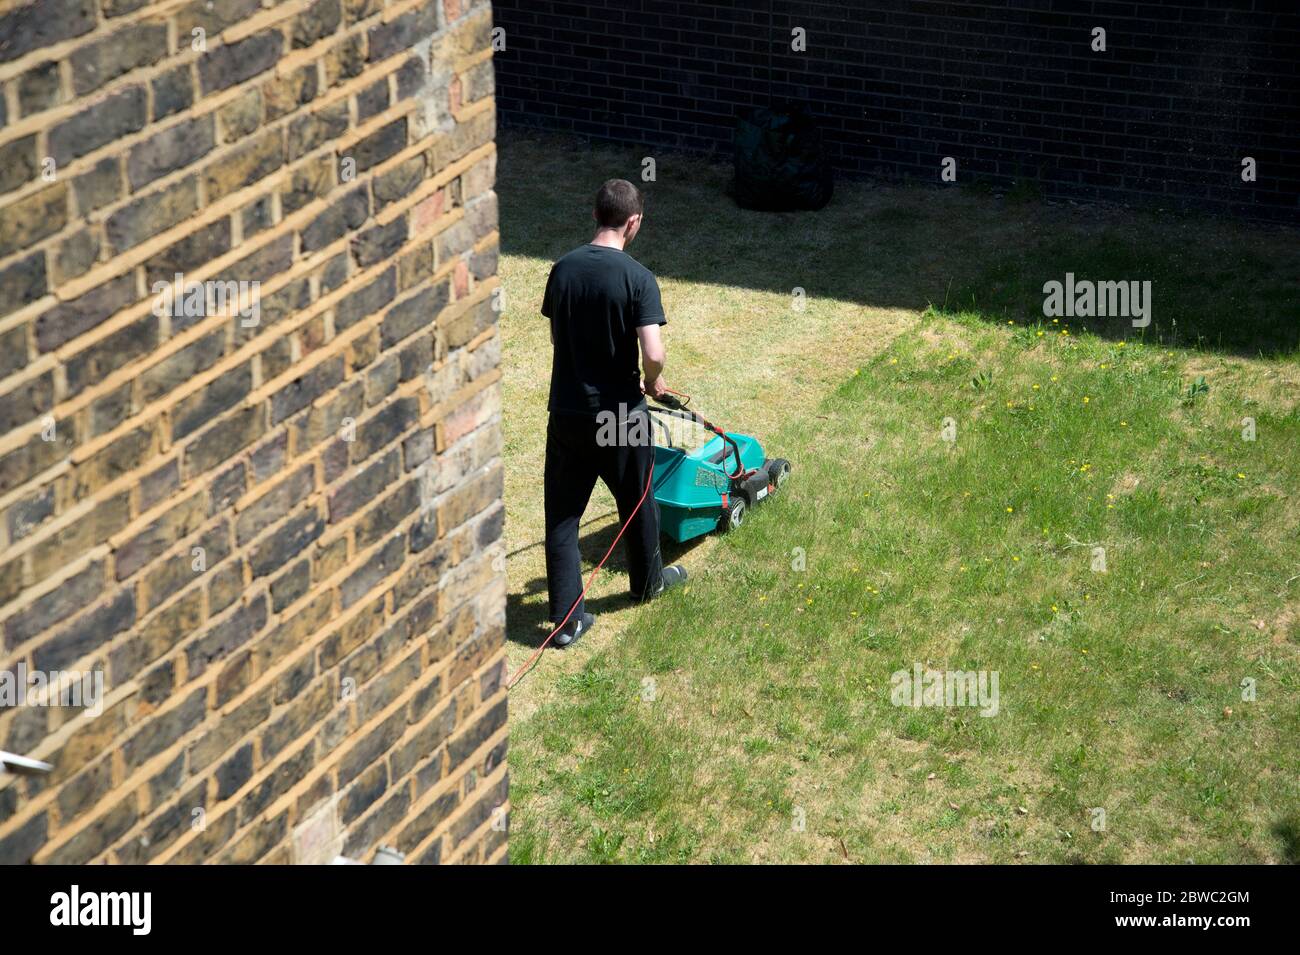 Hackney,London May 2020 during the Covid-19 (Coronavirus) pandemic. Cutting the lawn. Stock Photo